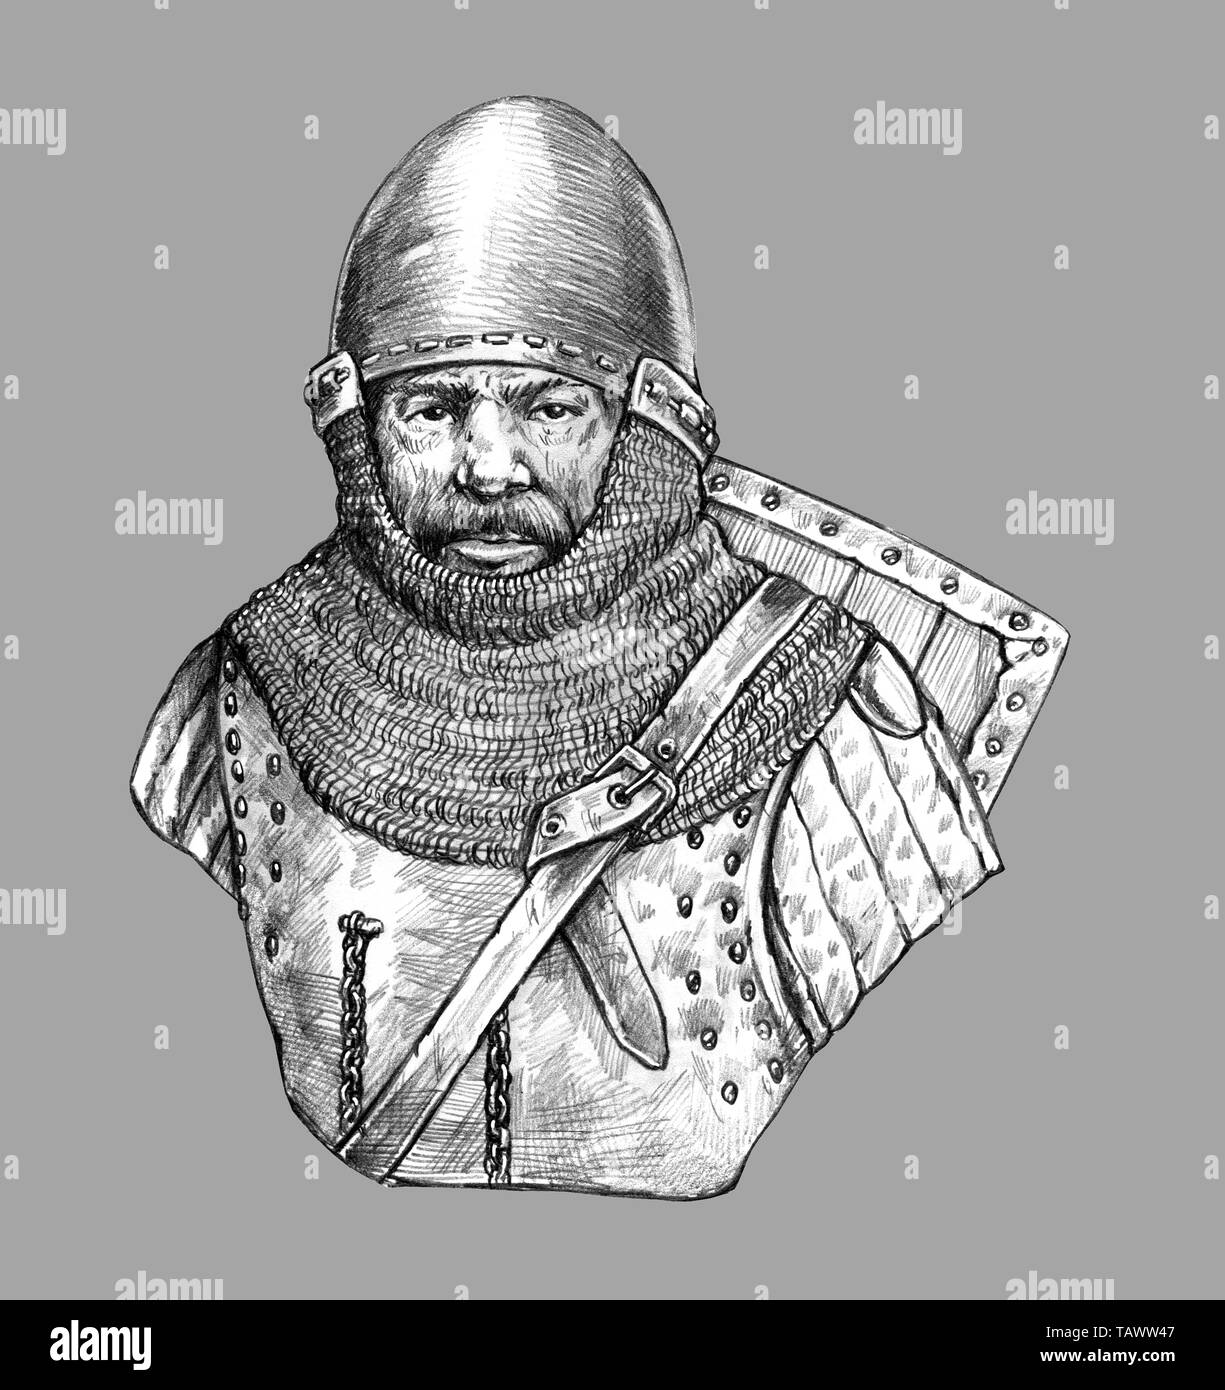 Medieval knight bust drawing. Knight isolated illustration. Historical ...